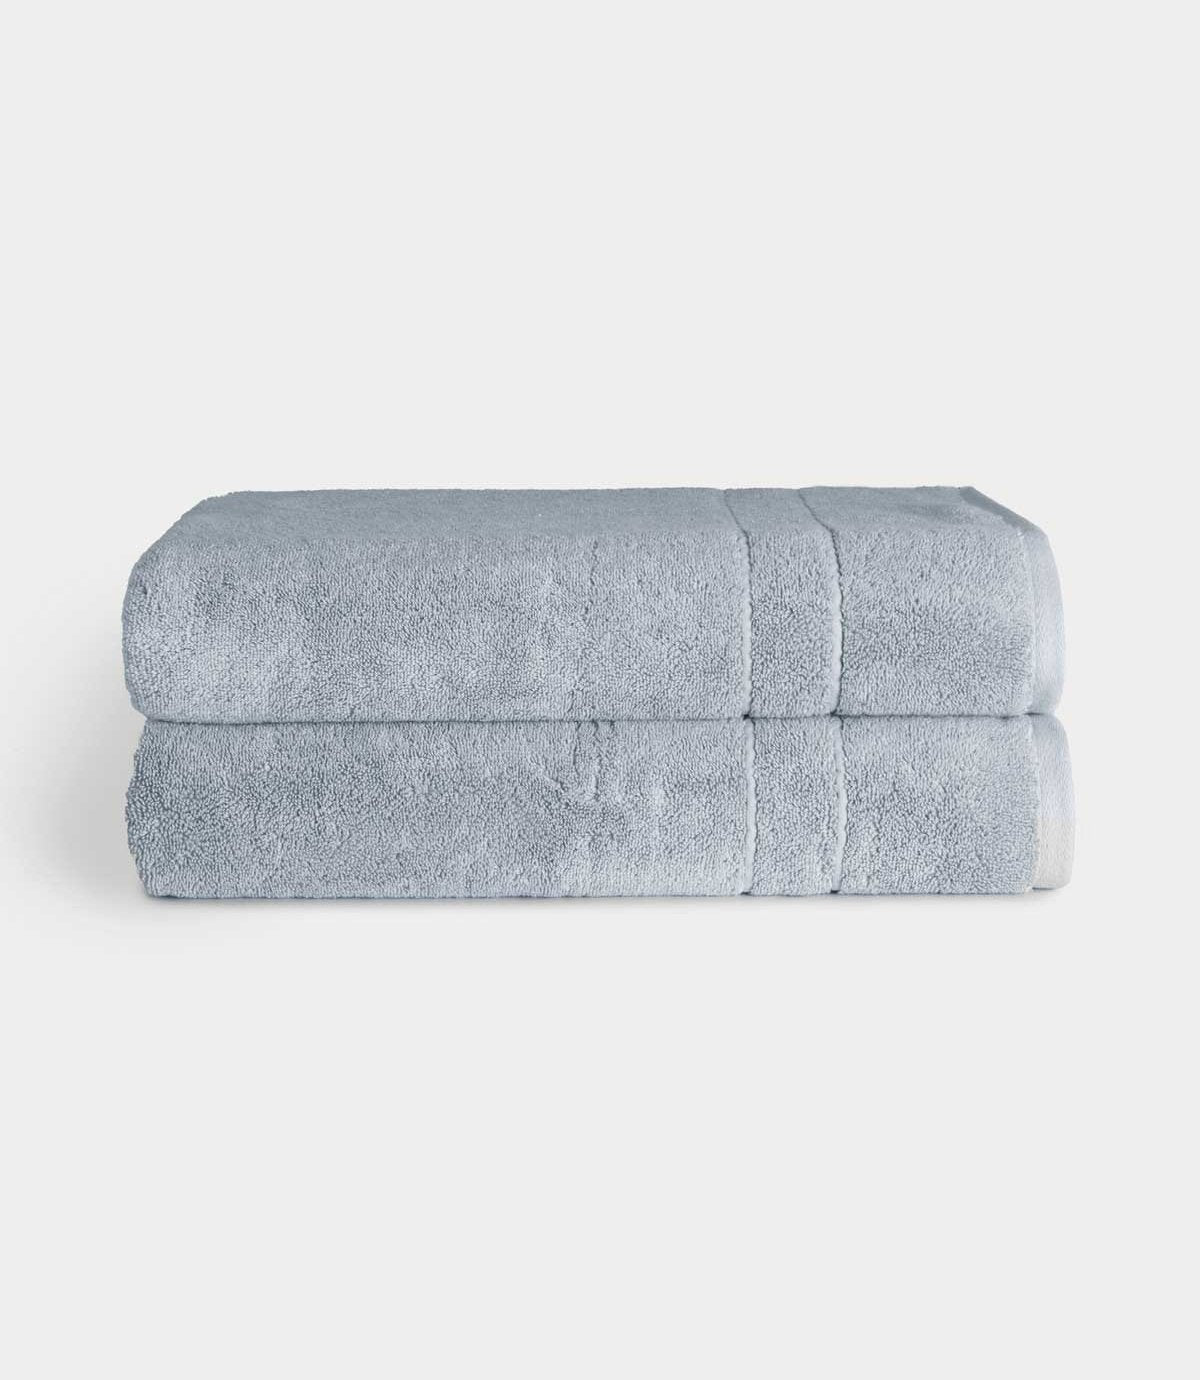 Premium Plush Bath Sheets in the color Harbor Mist. Photo of bath sheets taken with white background 